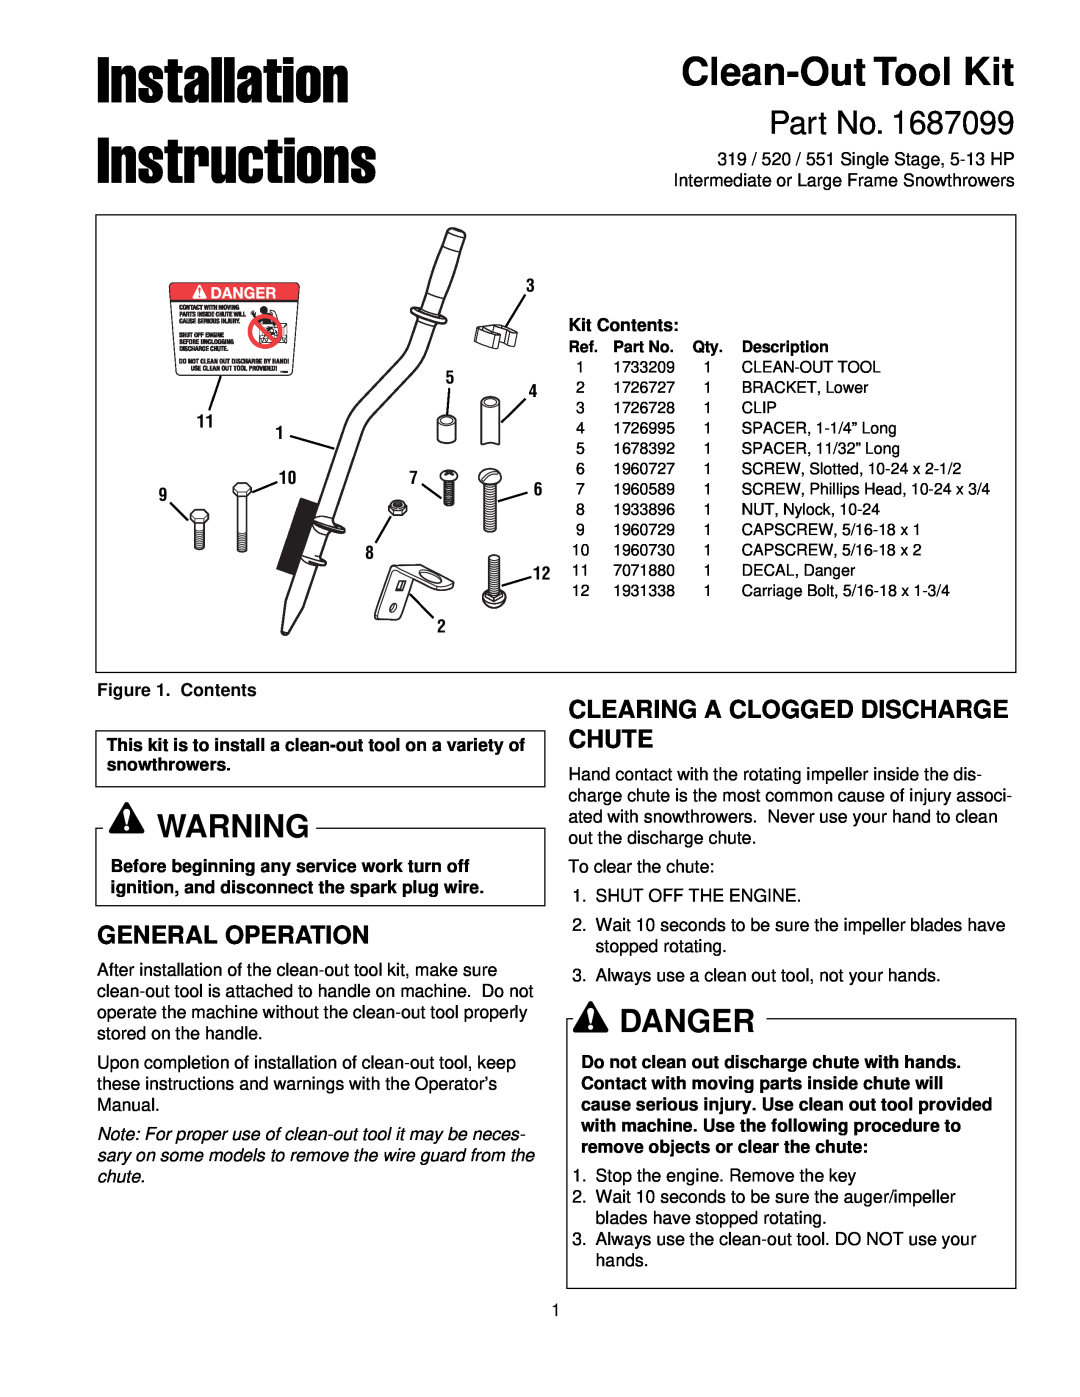 Snapper 1687099 installation instructions Danger, General Operation, Clearing A Clogged Discharge Chute, Clean-OutTool Kit 